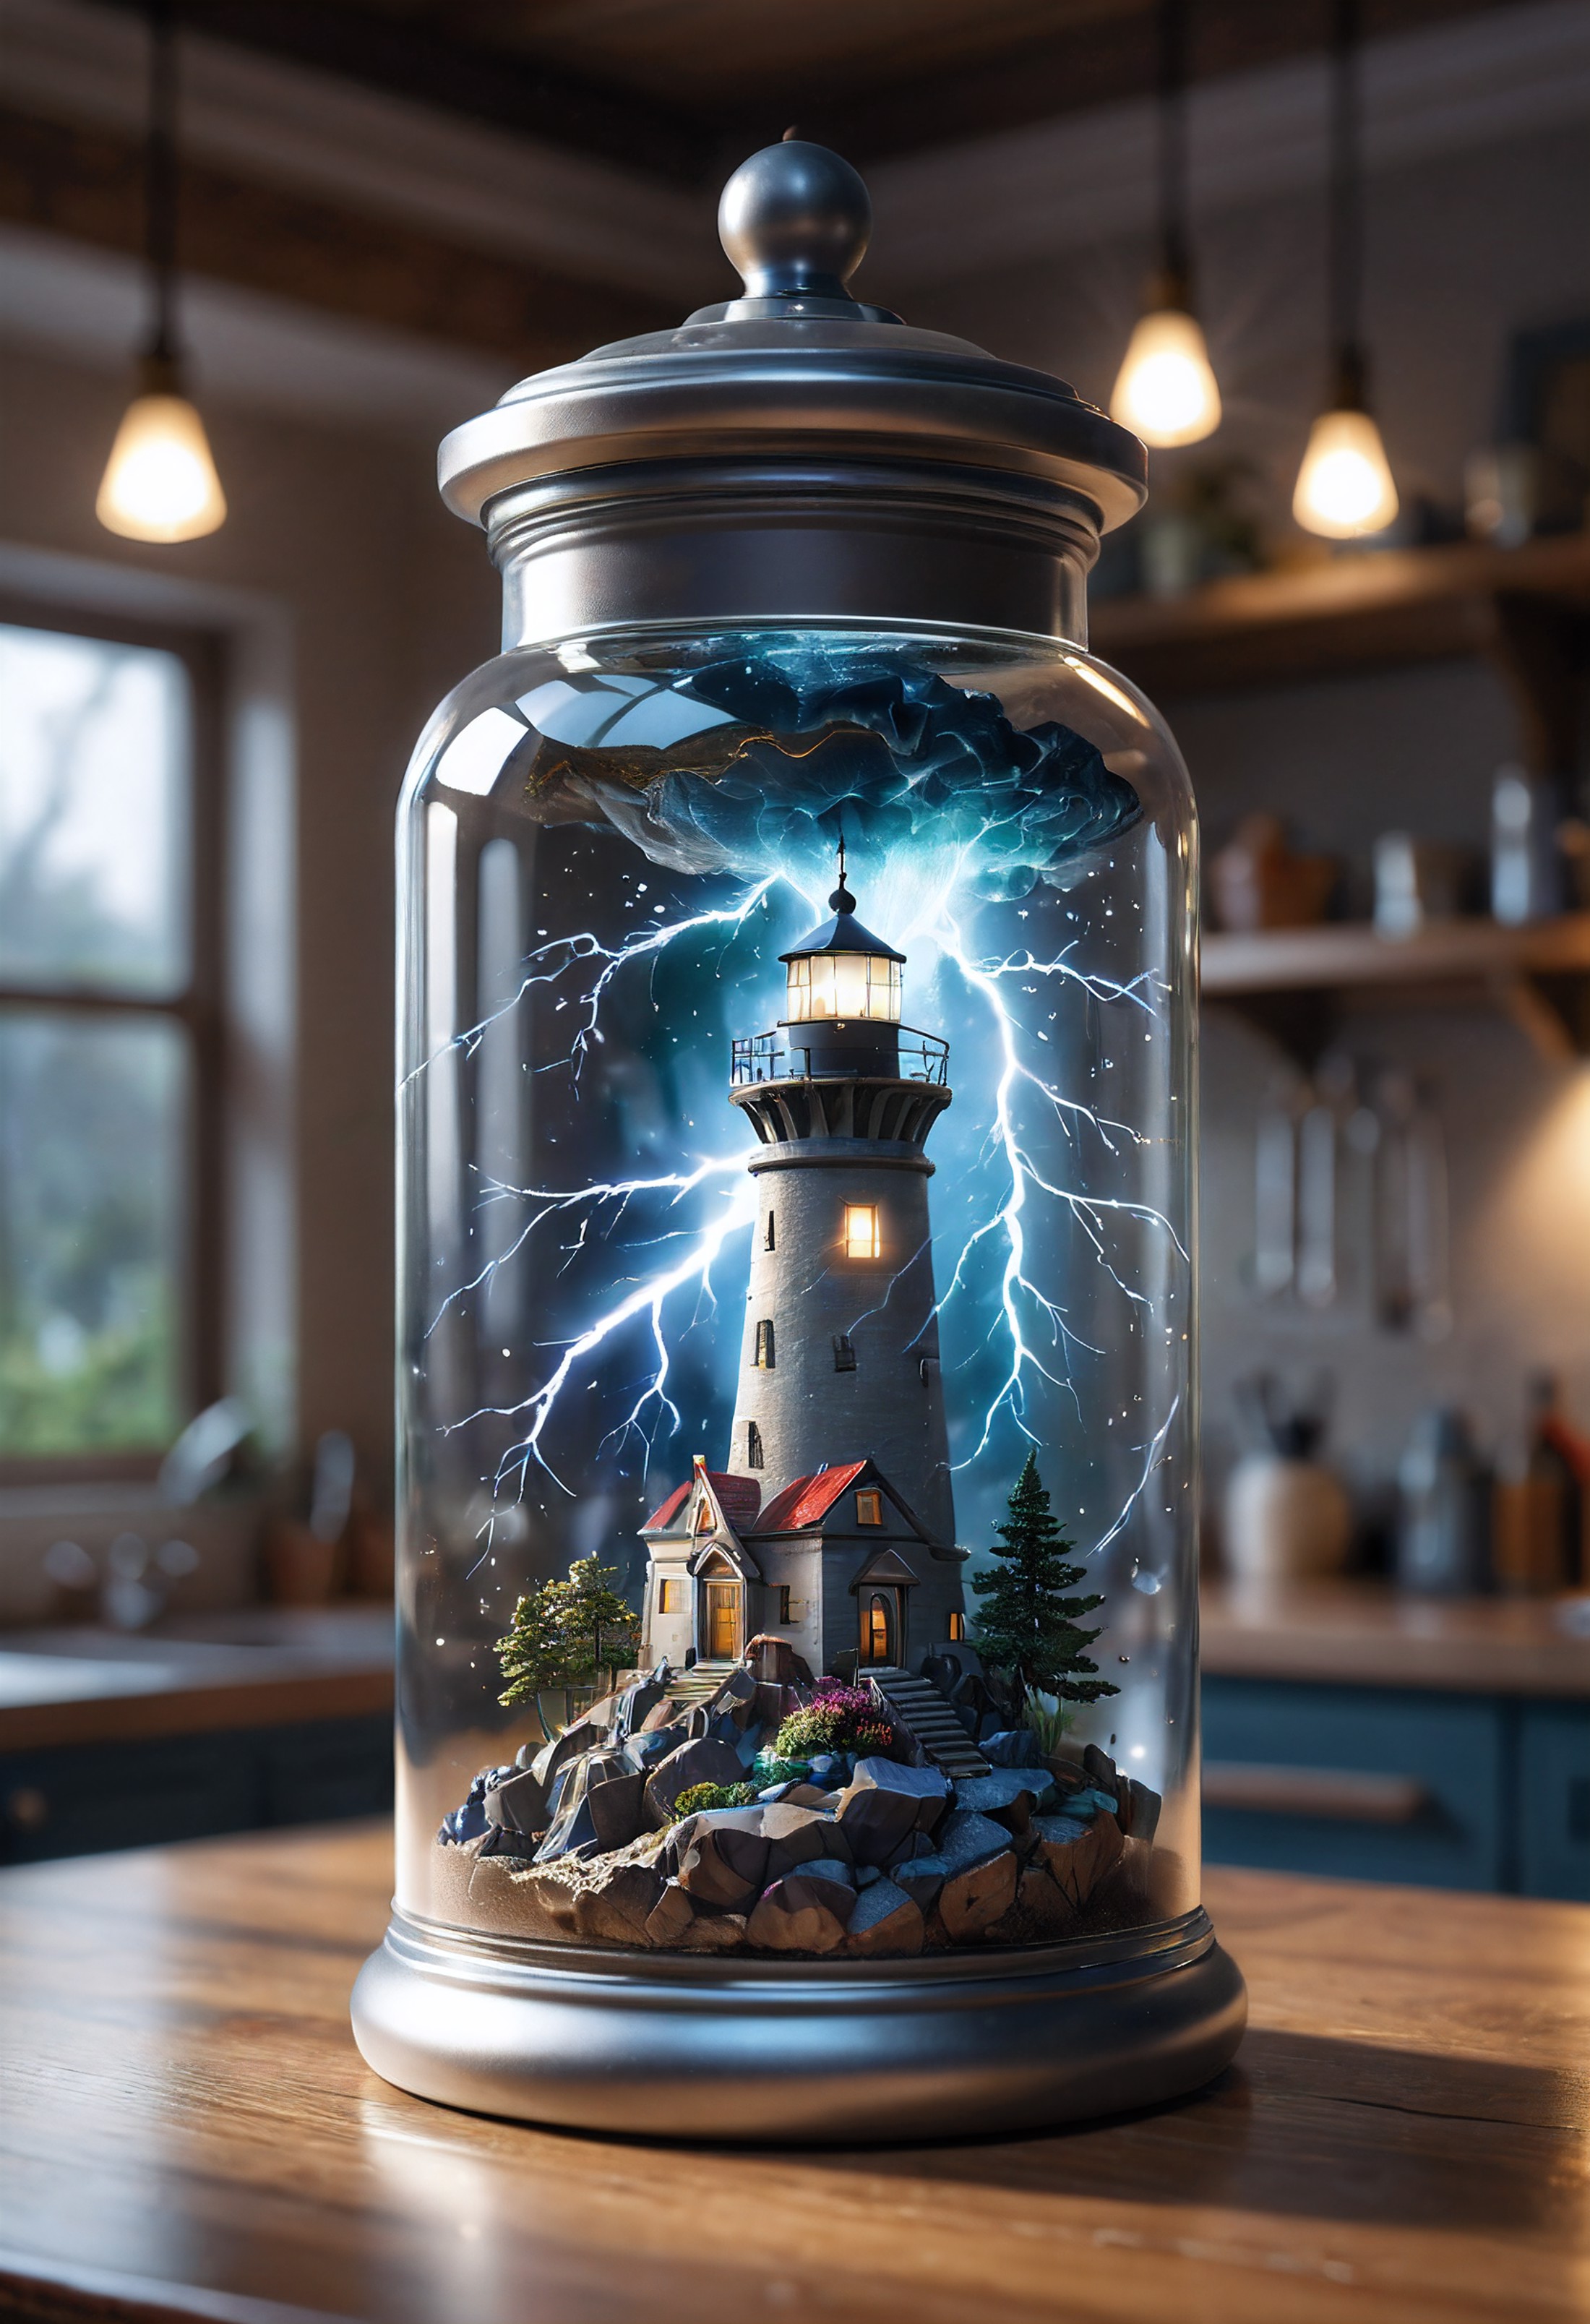 sci-fi style epic scene, an optical illusion of a lighthouse in a storm, lightning storm, inside of a glass jar. glass jar...